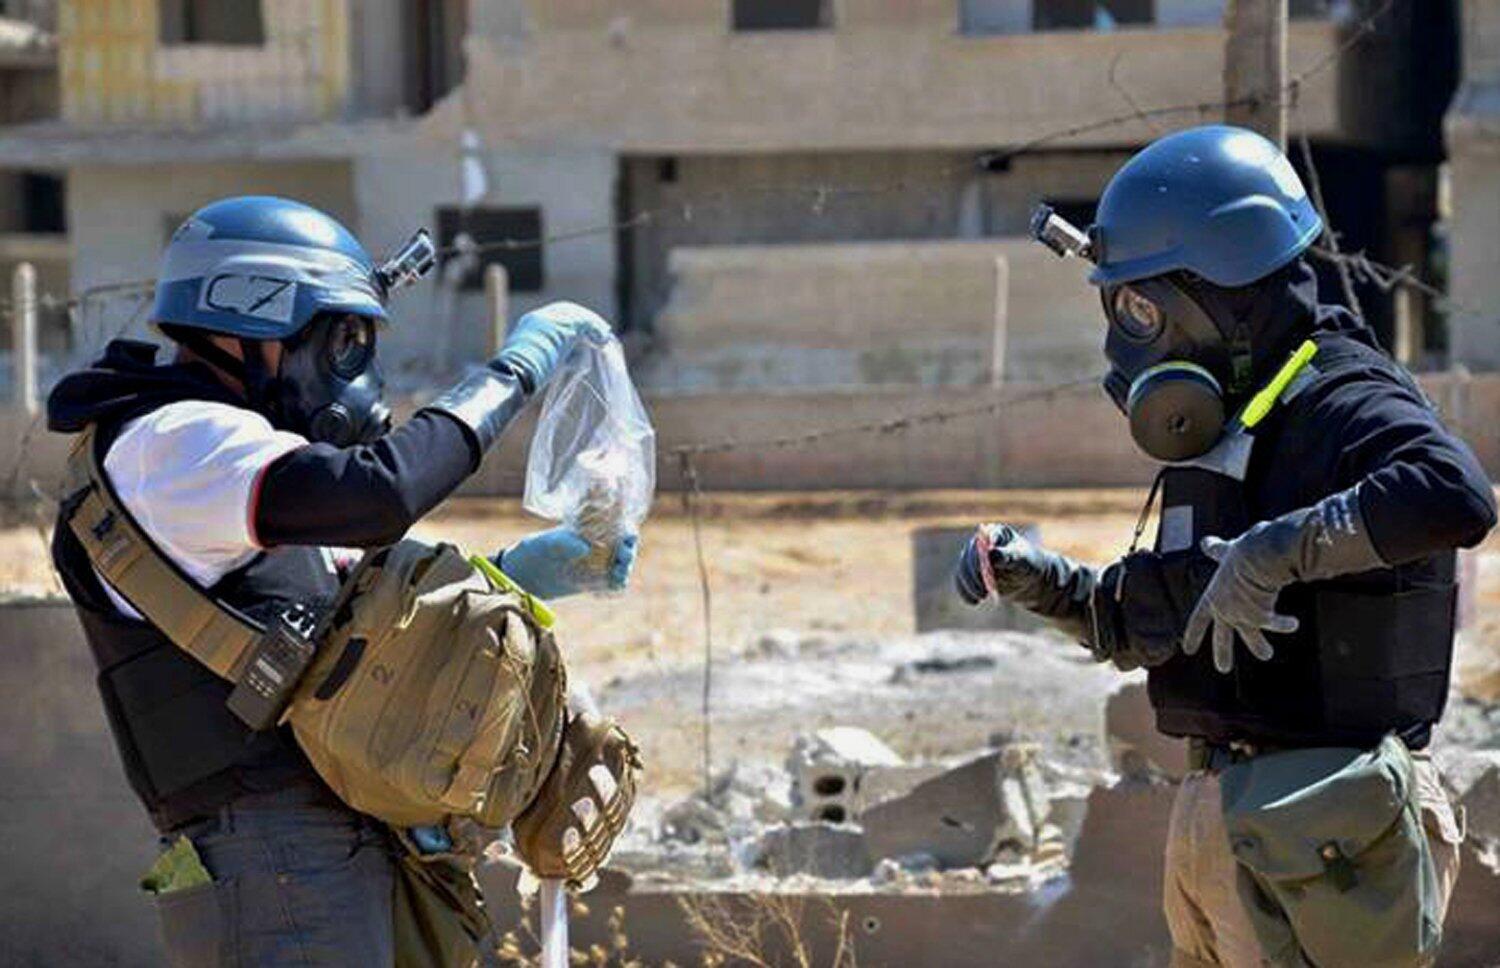 Will we see a Syria-style “chemical attack” in Ukraine?